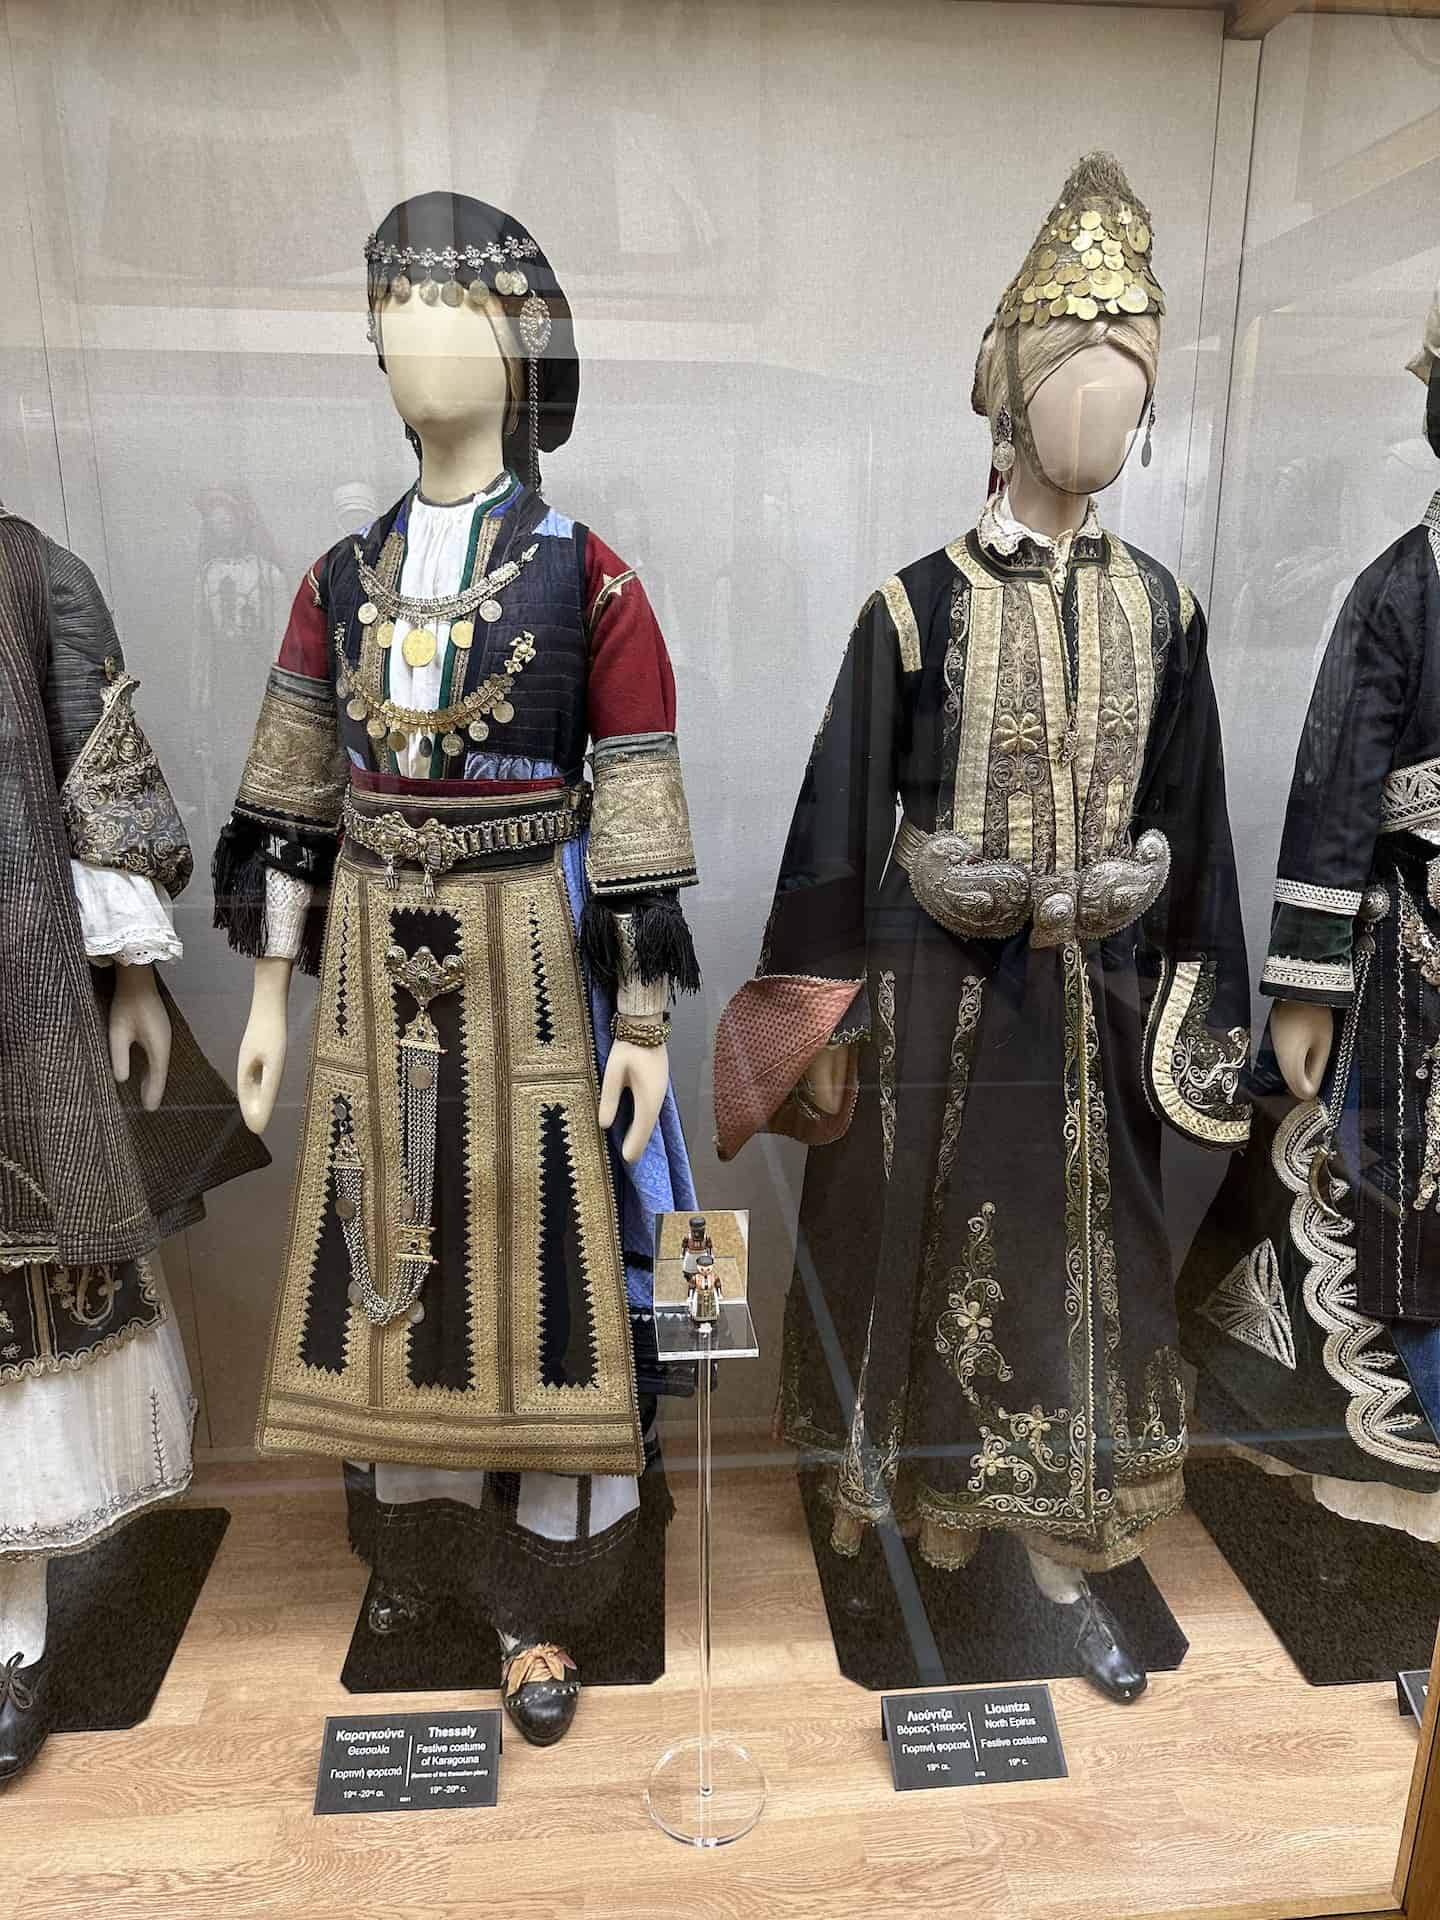 Festive costume of the Karagouna (farmers of the Thessalian plain), Thessaly, 19th-20th century (left); festive costume from Liountza, North Epirus, 19th century (right) at the National Historical Museum in Athens, Greece